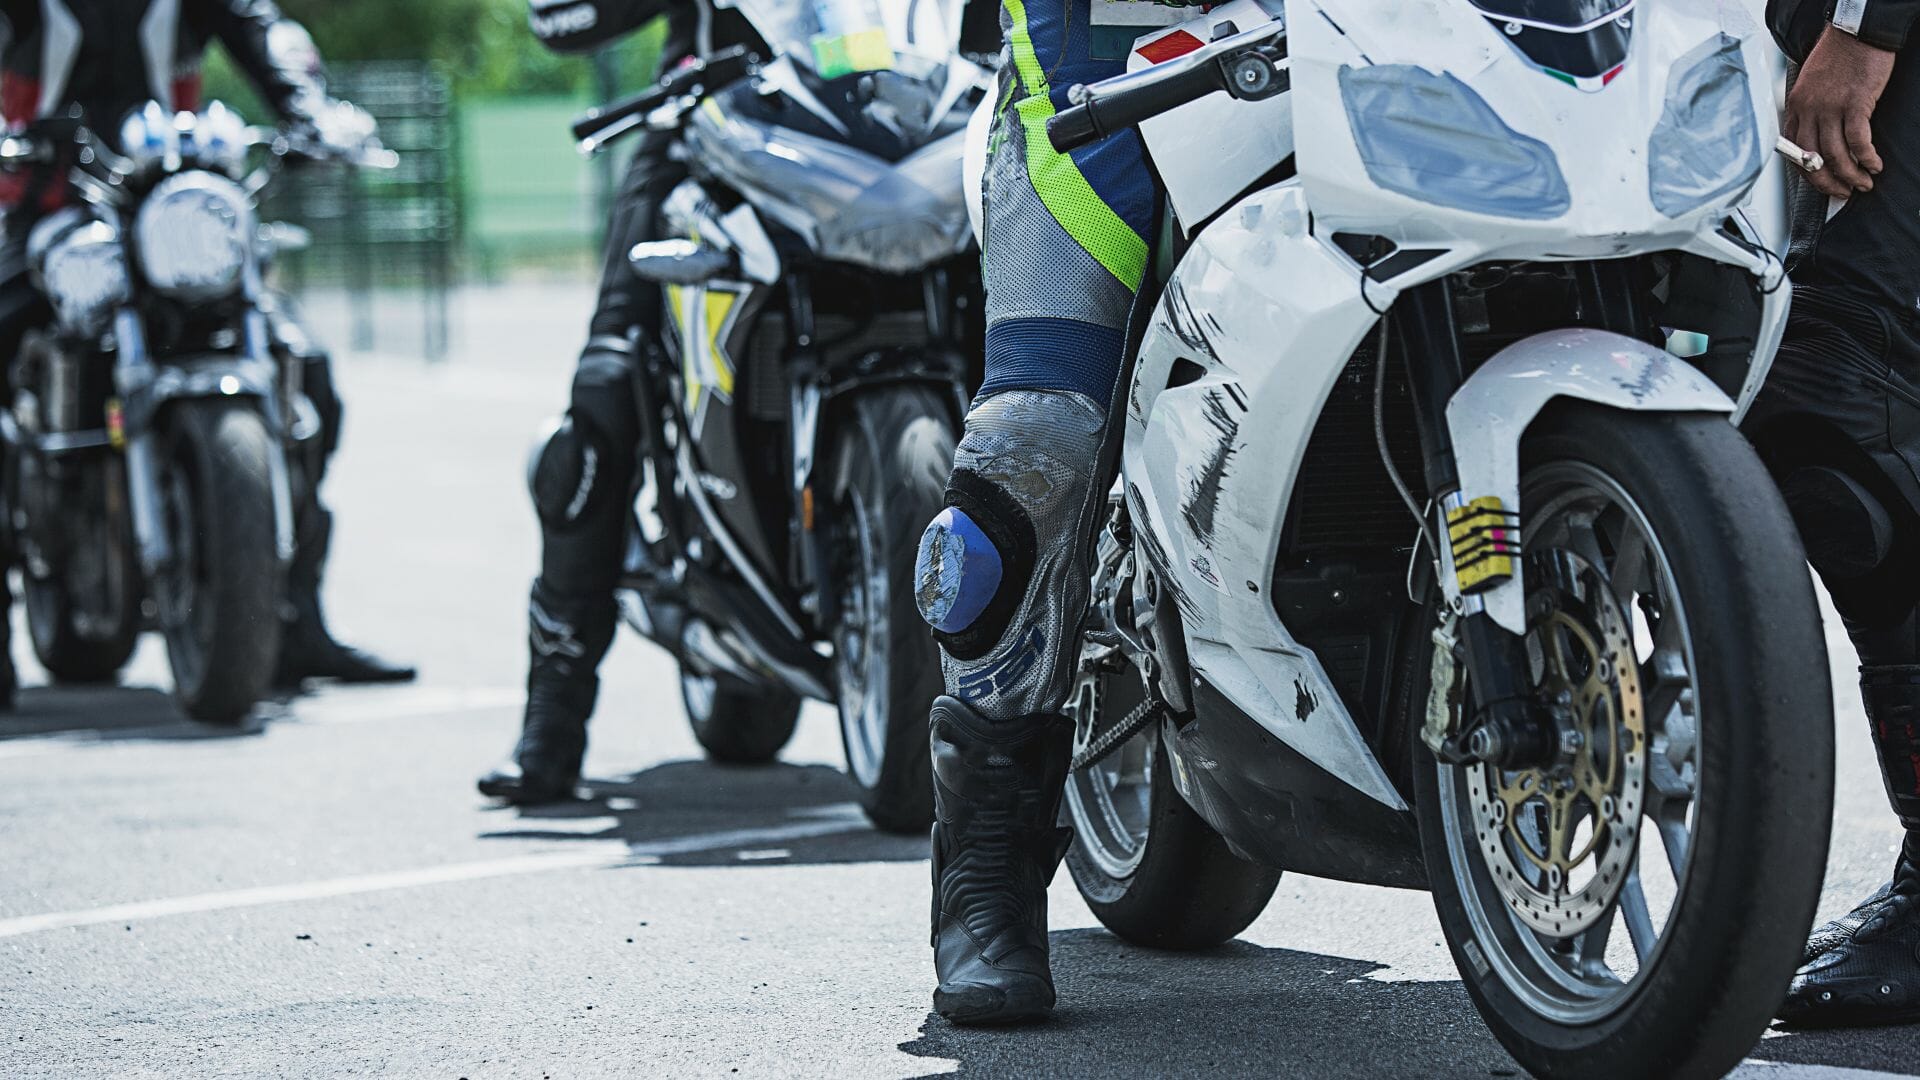 Springfield Motorcycle Accidents